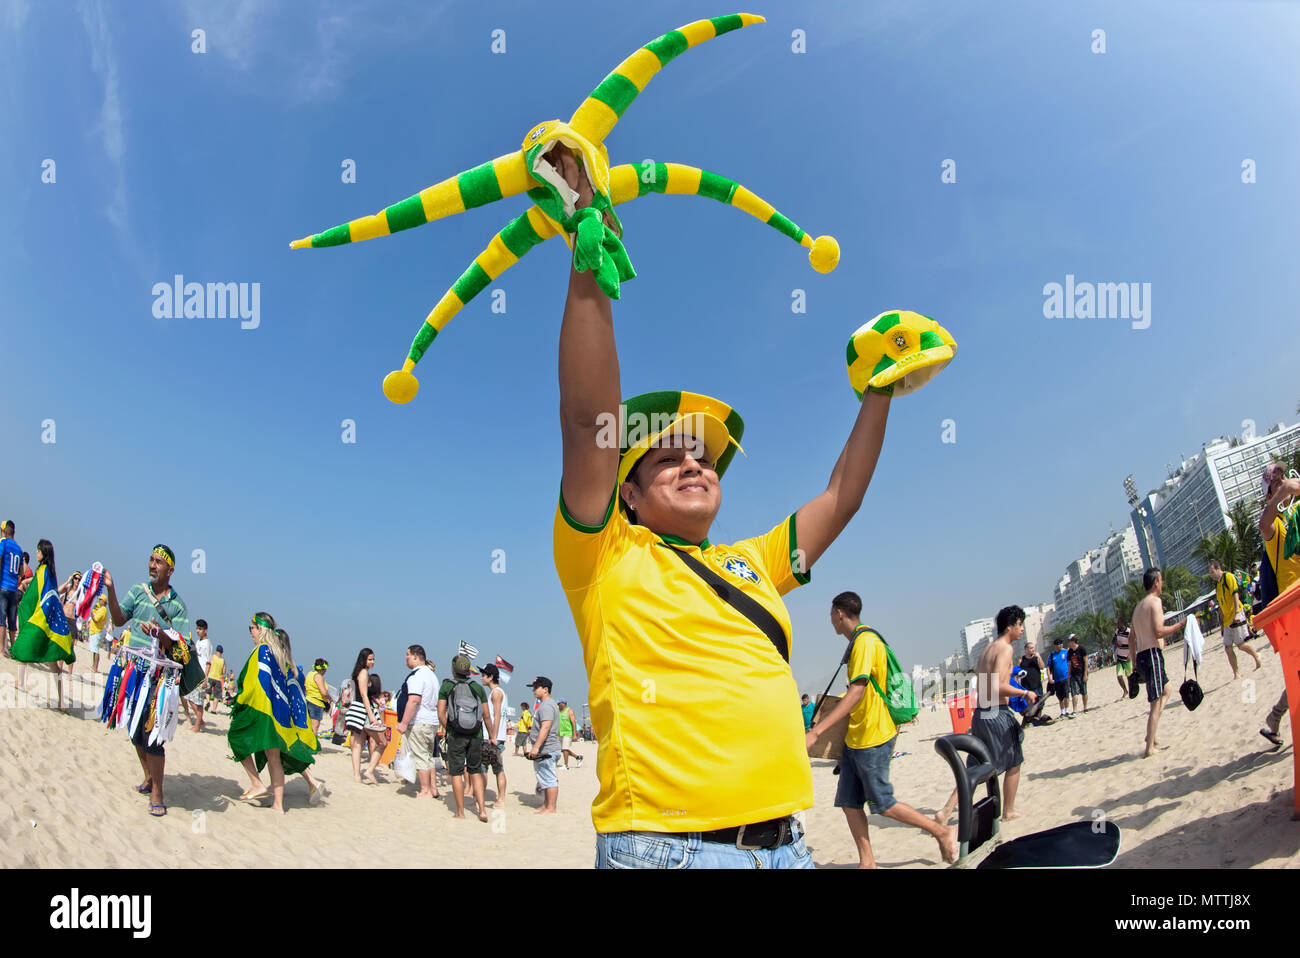 Copacabana, Rio de Janeiro - June 28, 2014: During the World Cup street vendors sell souvenirs in green and yellow, the national colours of Brazil Stock Photo